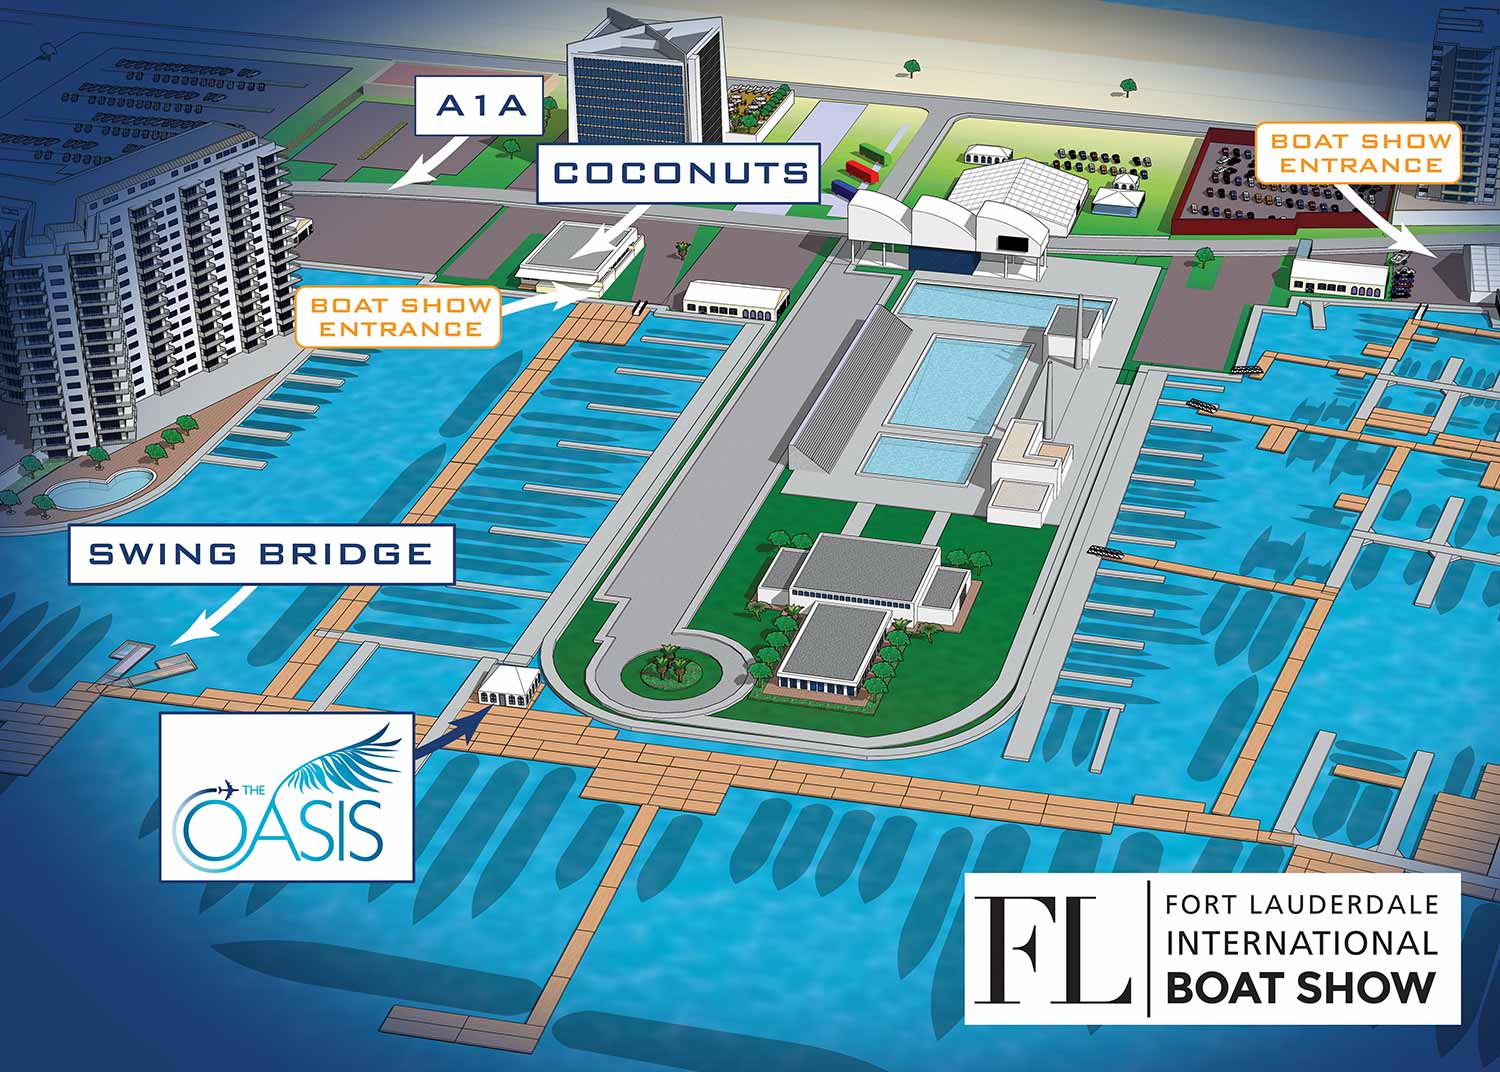 Map of The Oasis VIP Lounge by Global Marine Travel  at The Fort Lauderdale International Boat Show